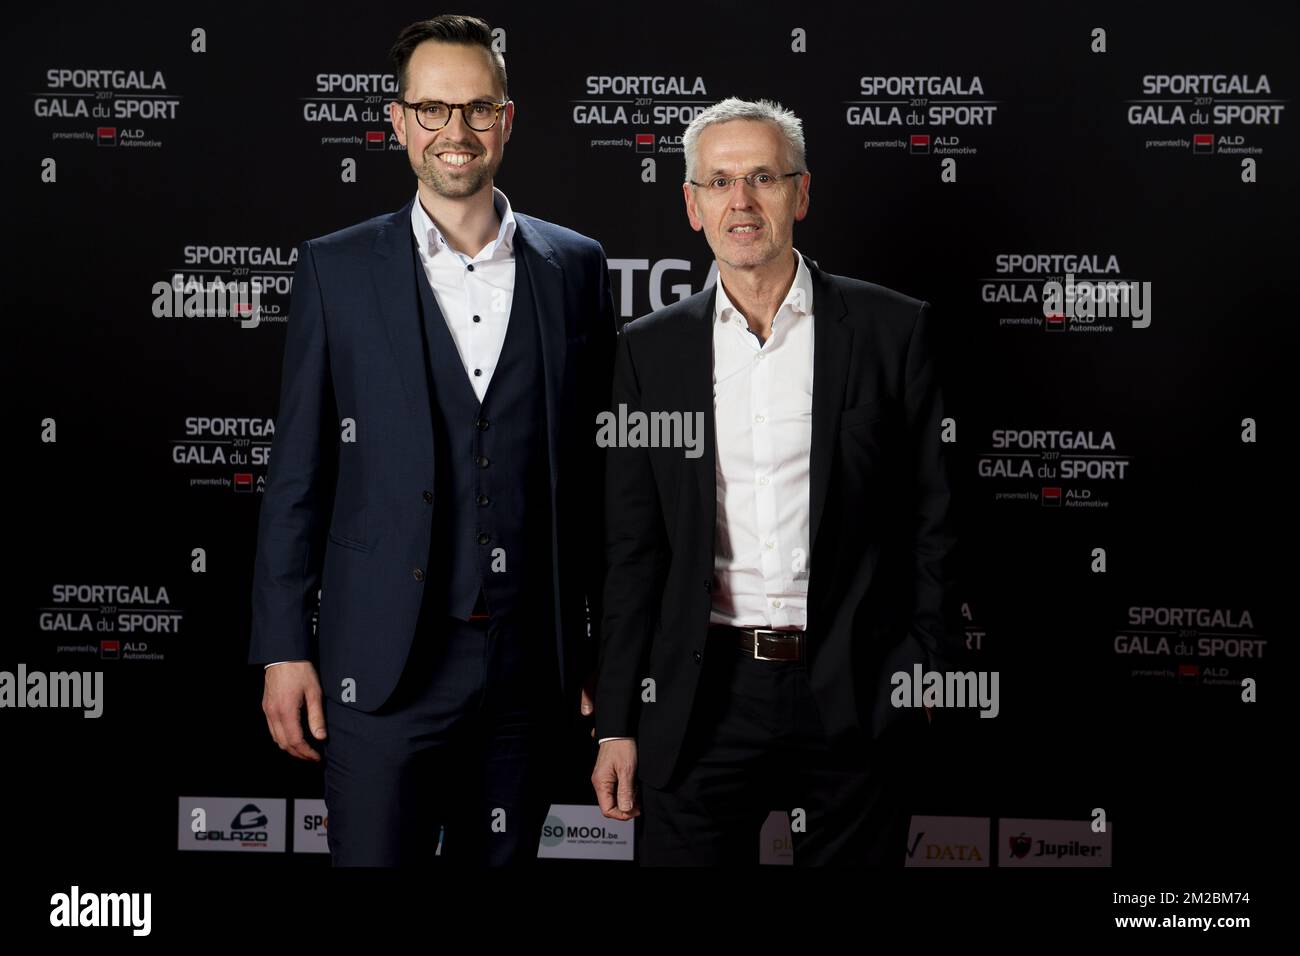 Paul Van den Bosch (R) pictured during the gala evening for the sport man and woman of the year 2017 awards, Saturday 16 December 2017, in Brussels. BELGA PHOTO JASPER JACOBS Stock Photo